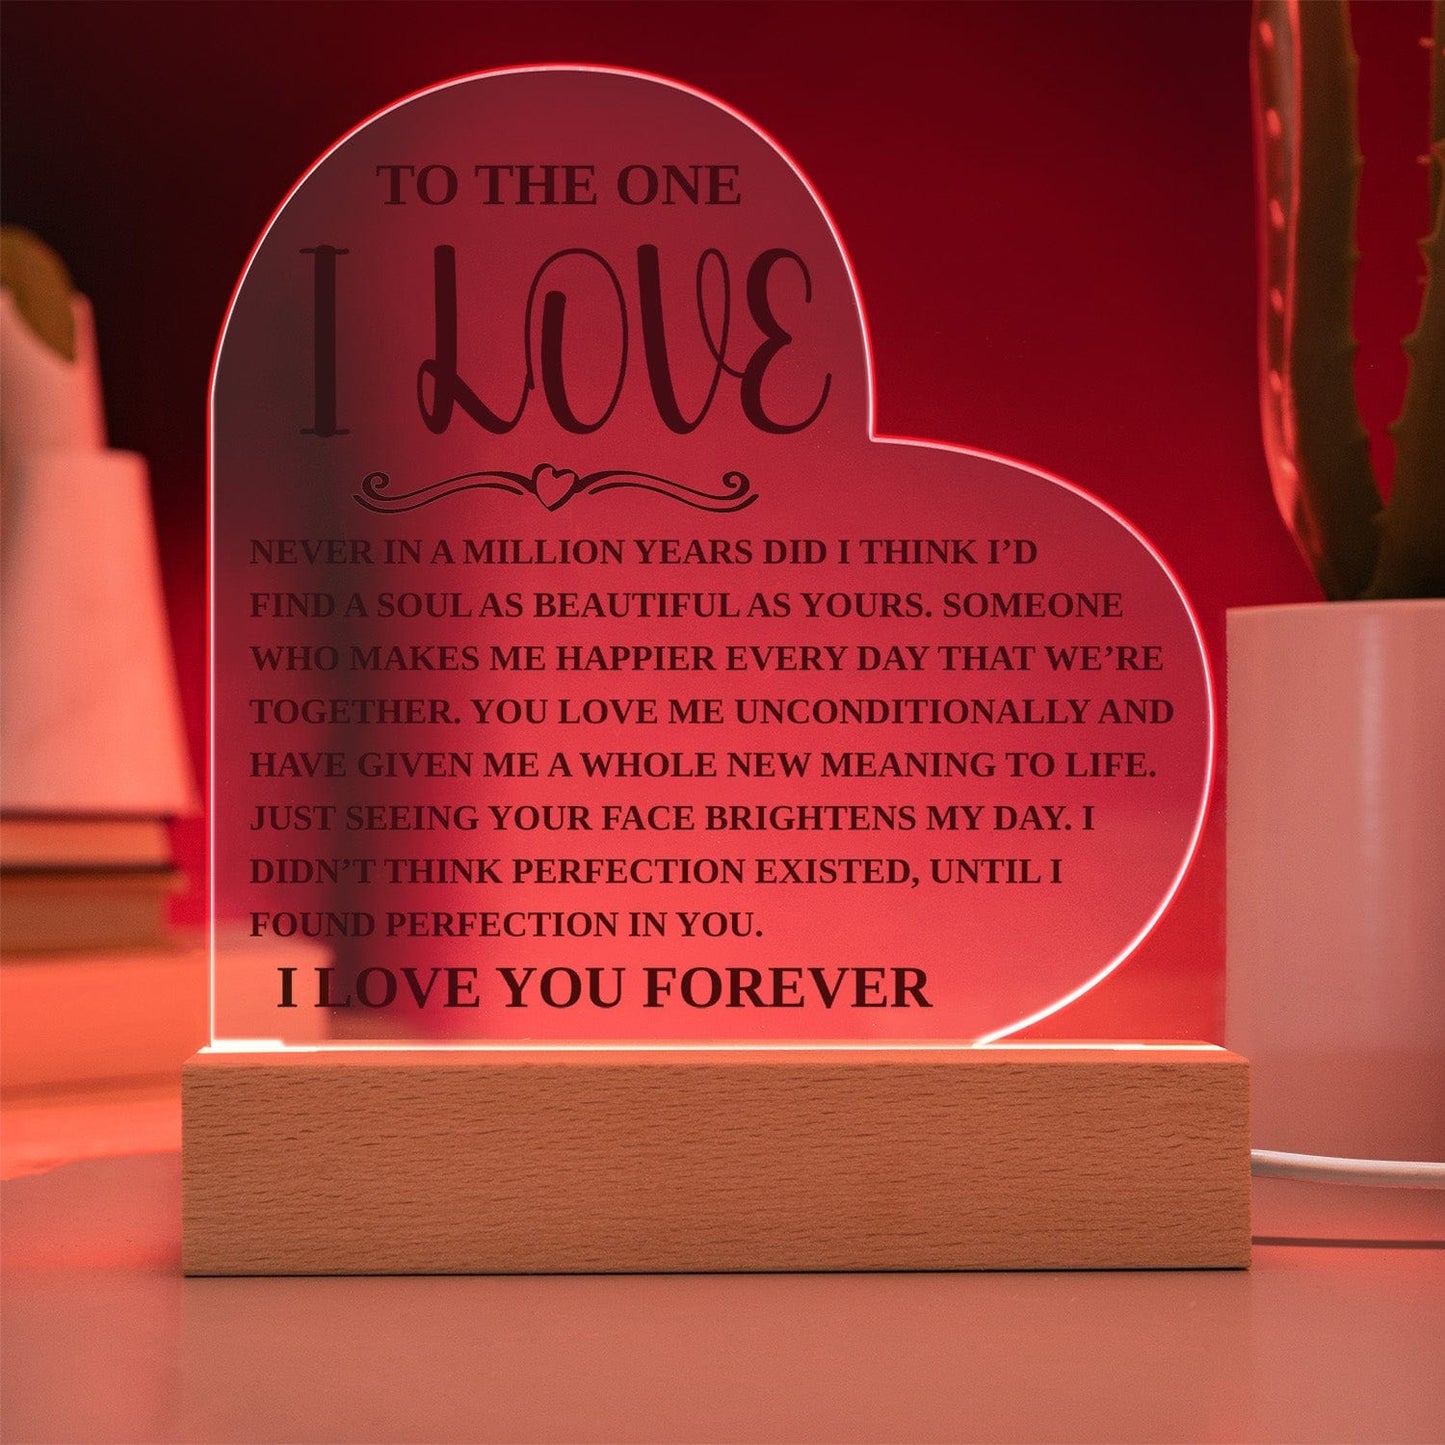 To The One I Love - Perfection In You - Acrylic Heart Plaque With Base